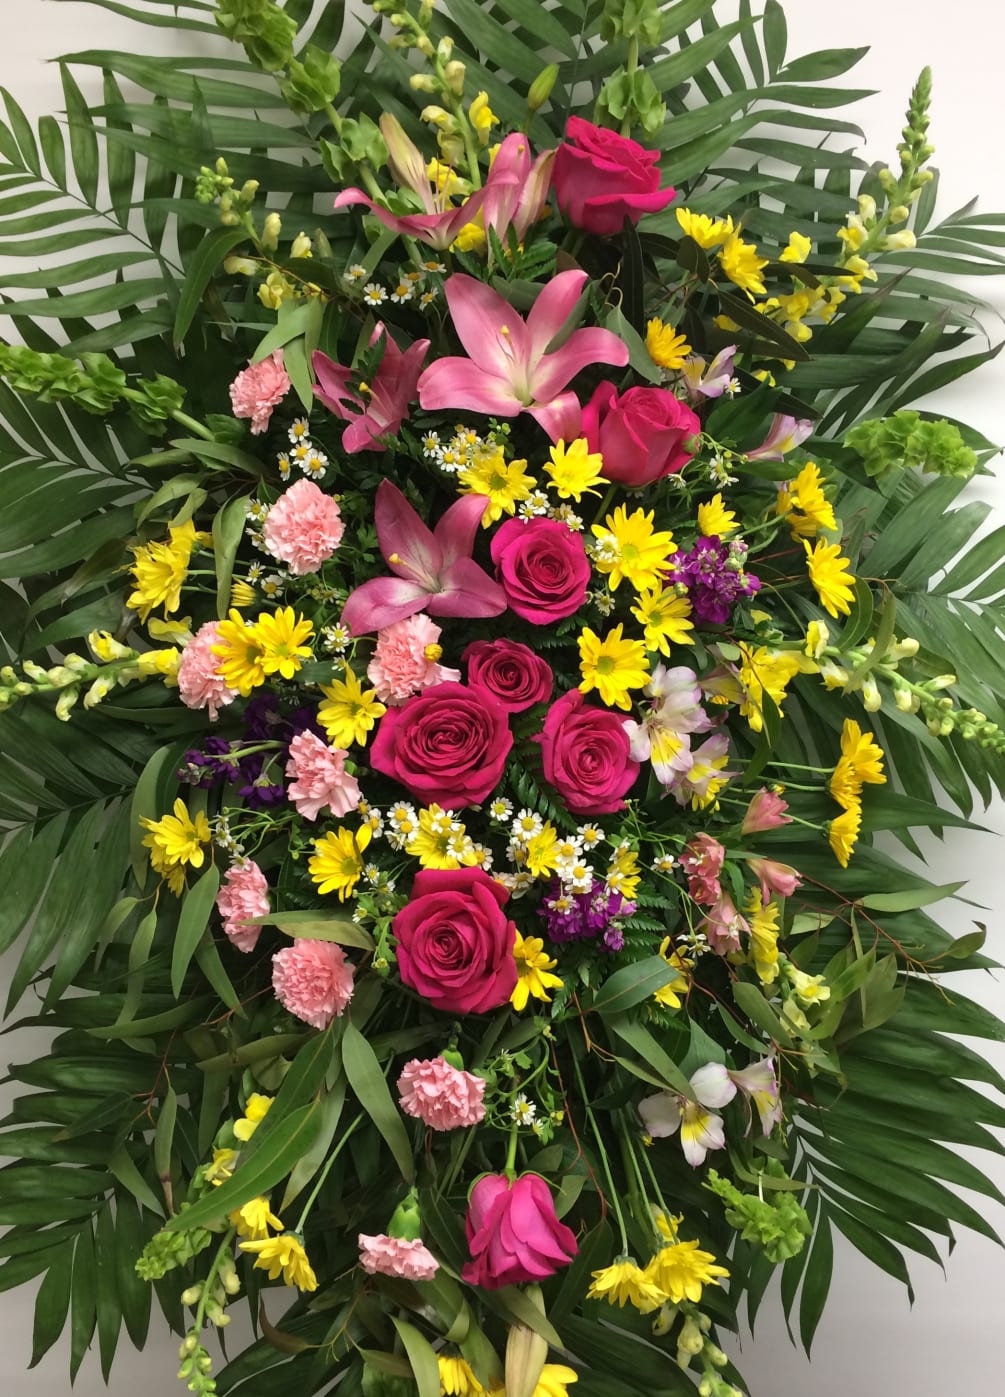 Pink lilies, pink roses &amp; carnations, daisy accents, and yellows.